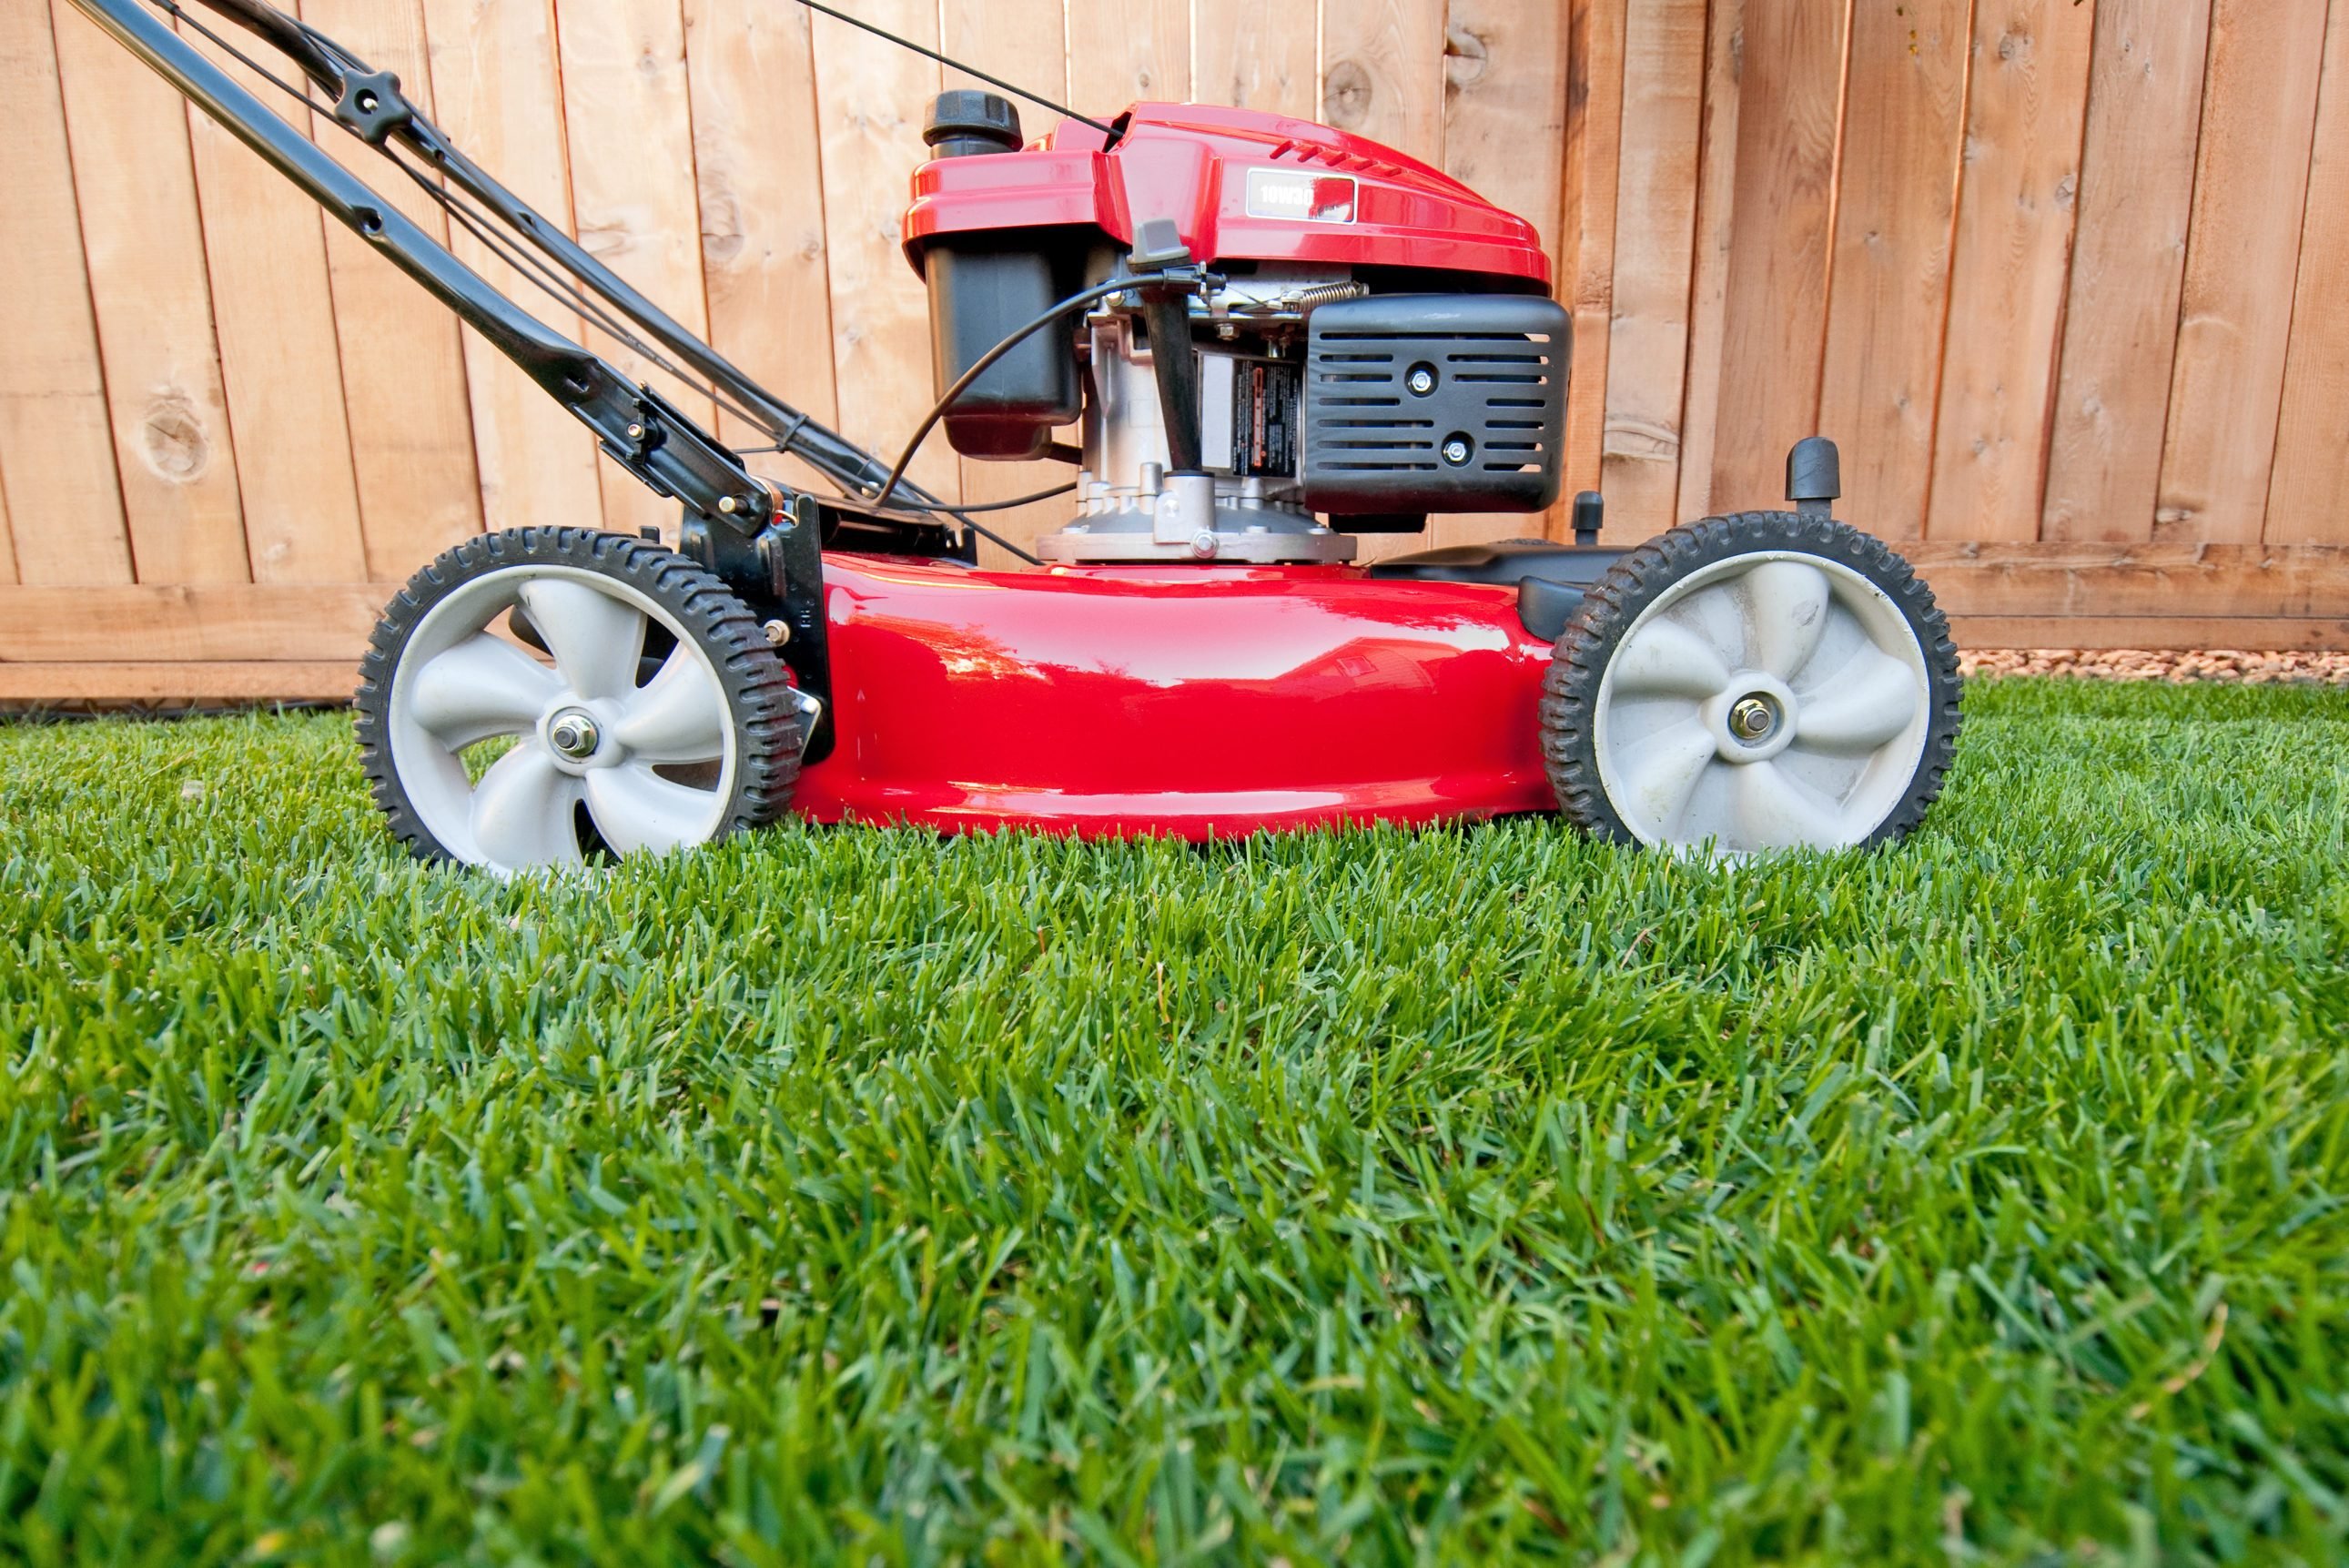 Bright red lawn mower ready for business